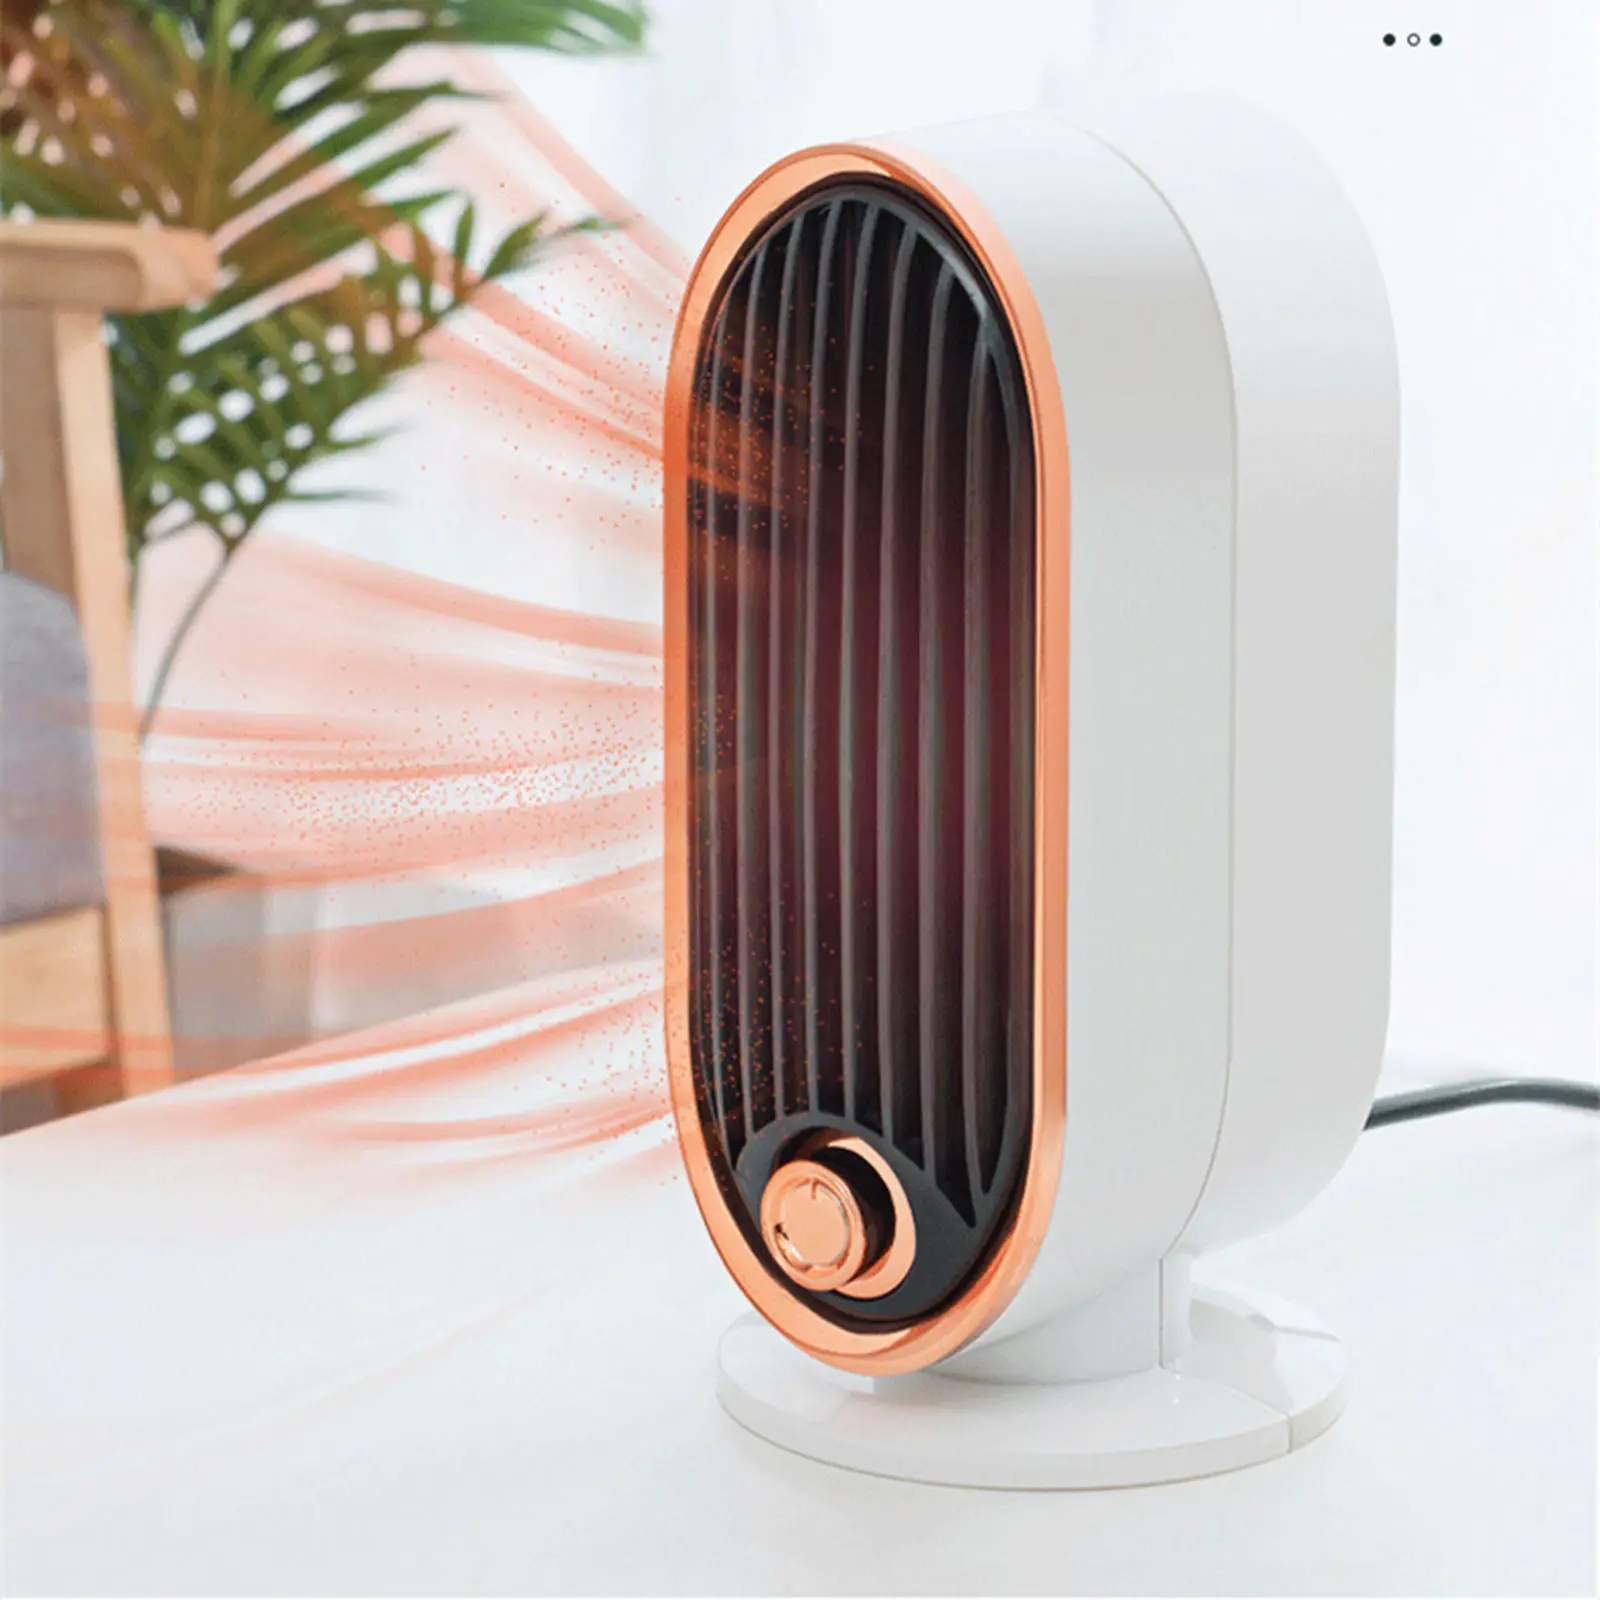 herencn Portable Mini Portable Electric Bladeless Desk Heater Handheld Air Fan Electric Heaters 